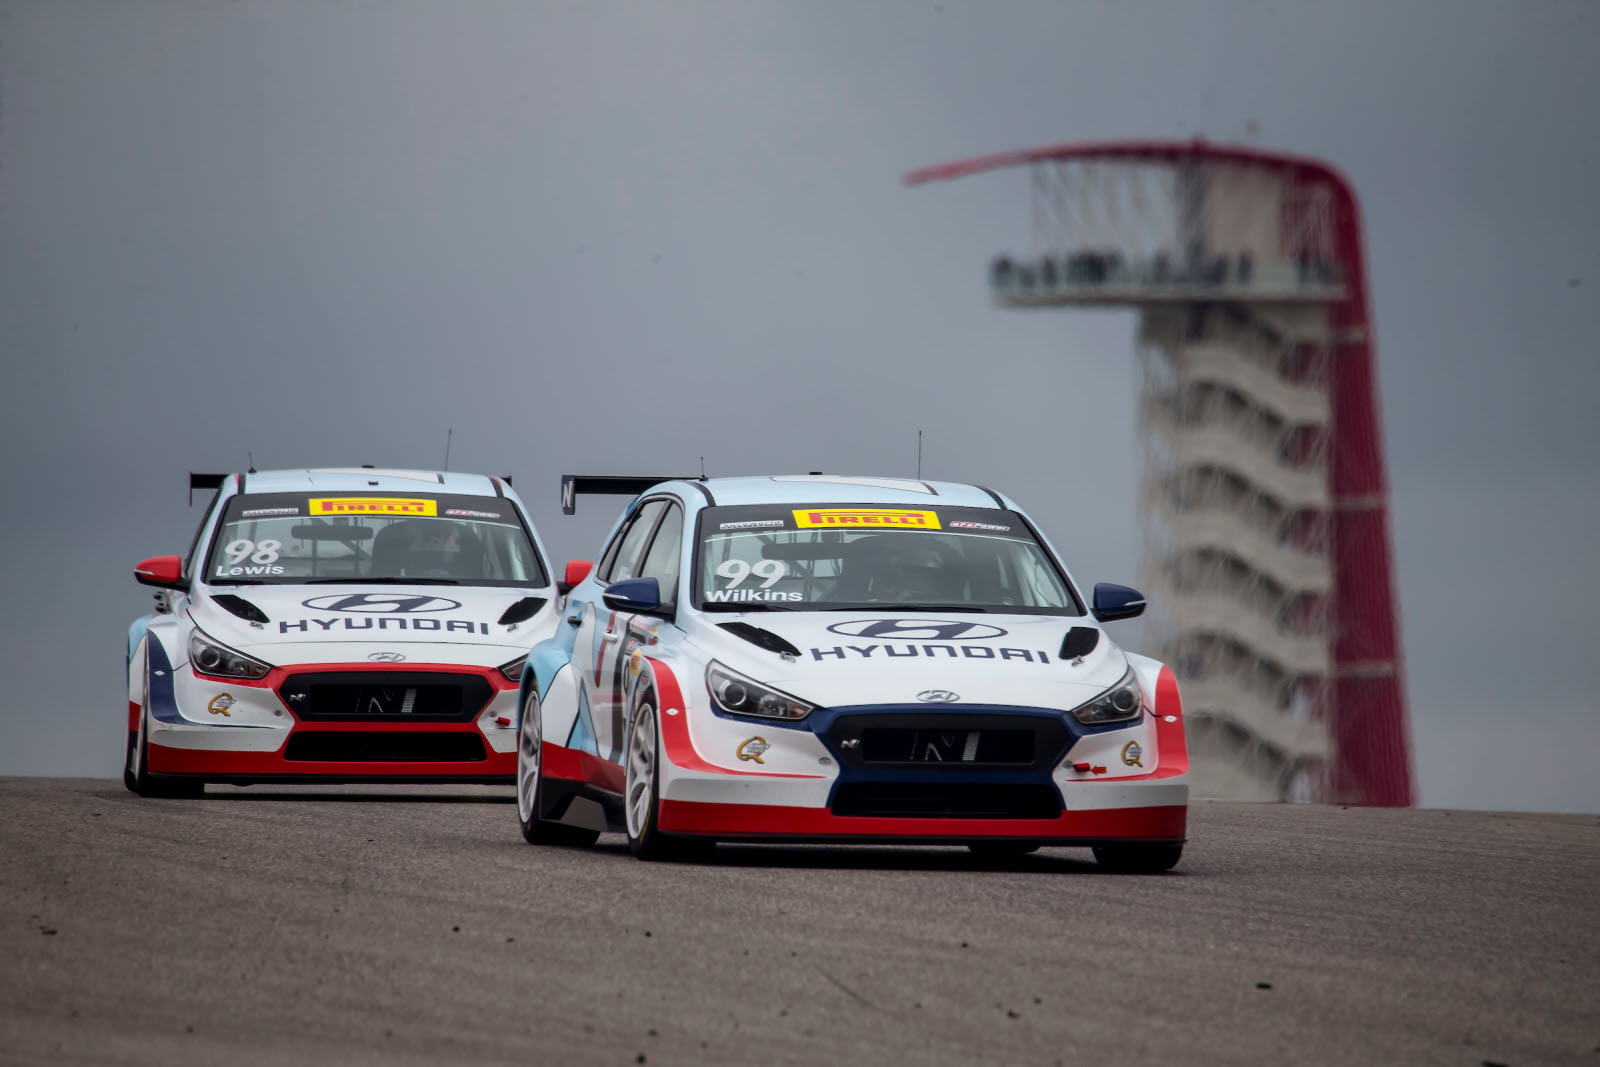 Bryan Herta Autosport drivers Mark Wilkins and Michael Lewis dominate the PWC Grand Prix of Texas at Circuit of the Americas. (photo by Brian Cleary/BCPix.com)